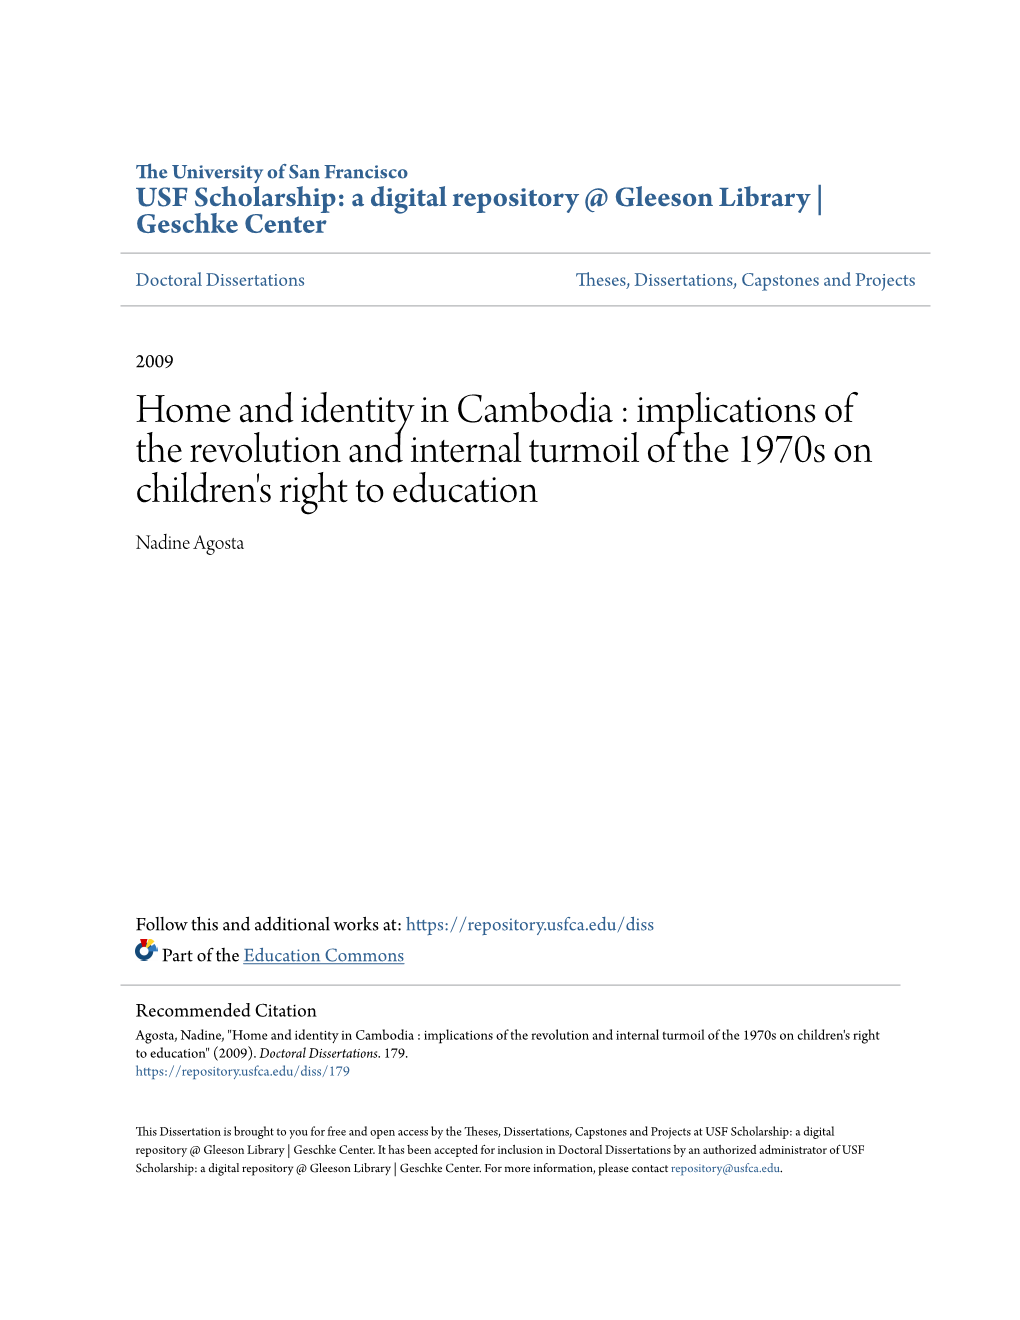 Home and Identity in Cambodia : Implications of the Revolution and Internal Turmoil of the 1970S on Children's Right to Education Nadine Agosta